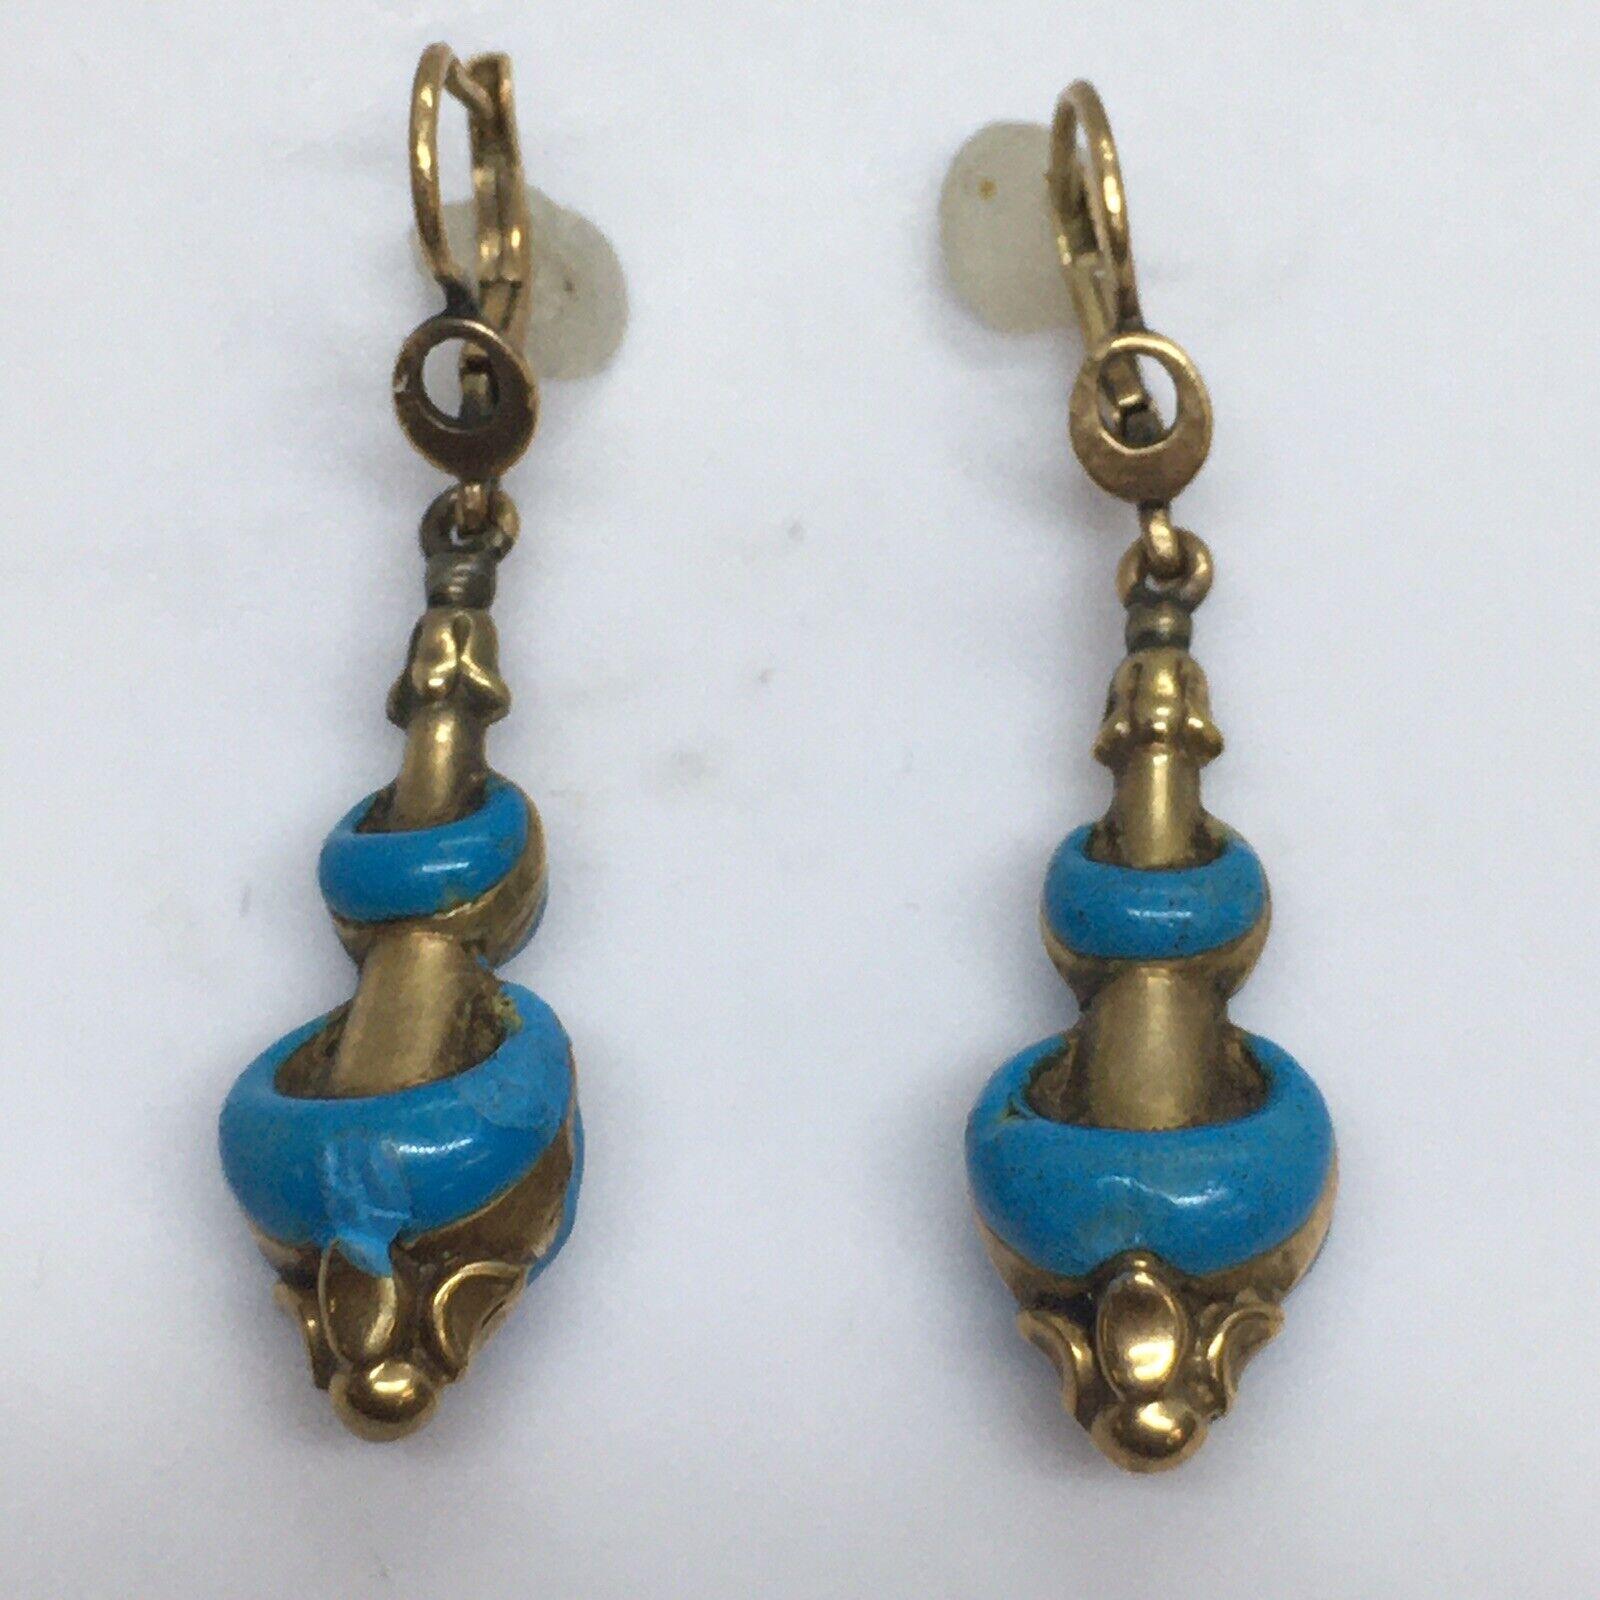 Victorian Etruscan Revival Drop Dangle Earrings 14 Karat Gold Enamel Light 1880s


3.9 gram
Unmarked tests 14k gold
Hanging 1.5 inch
Wear and tear, item is 140 years old, wear and tear is consistent of age, see pictures 
No Hallmarks, Loss to enamel